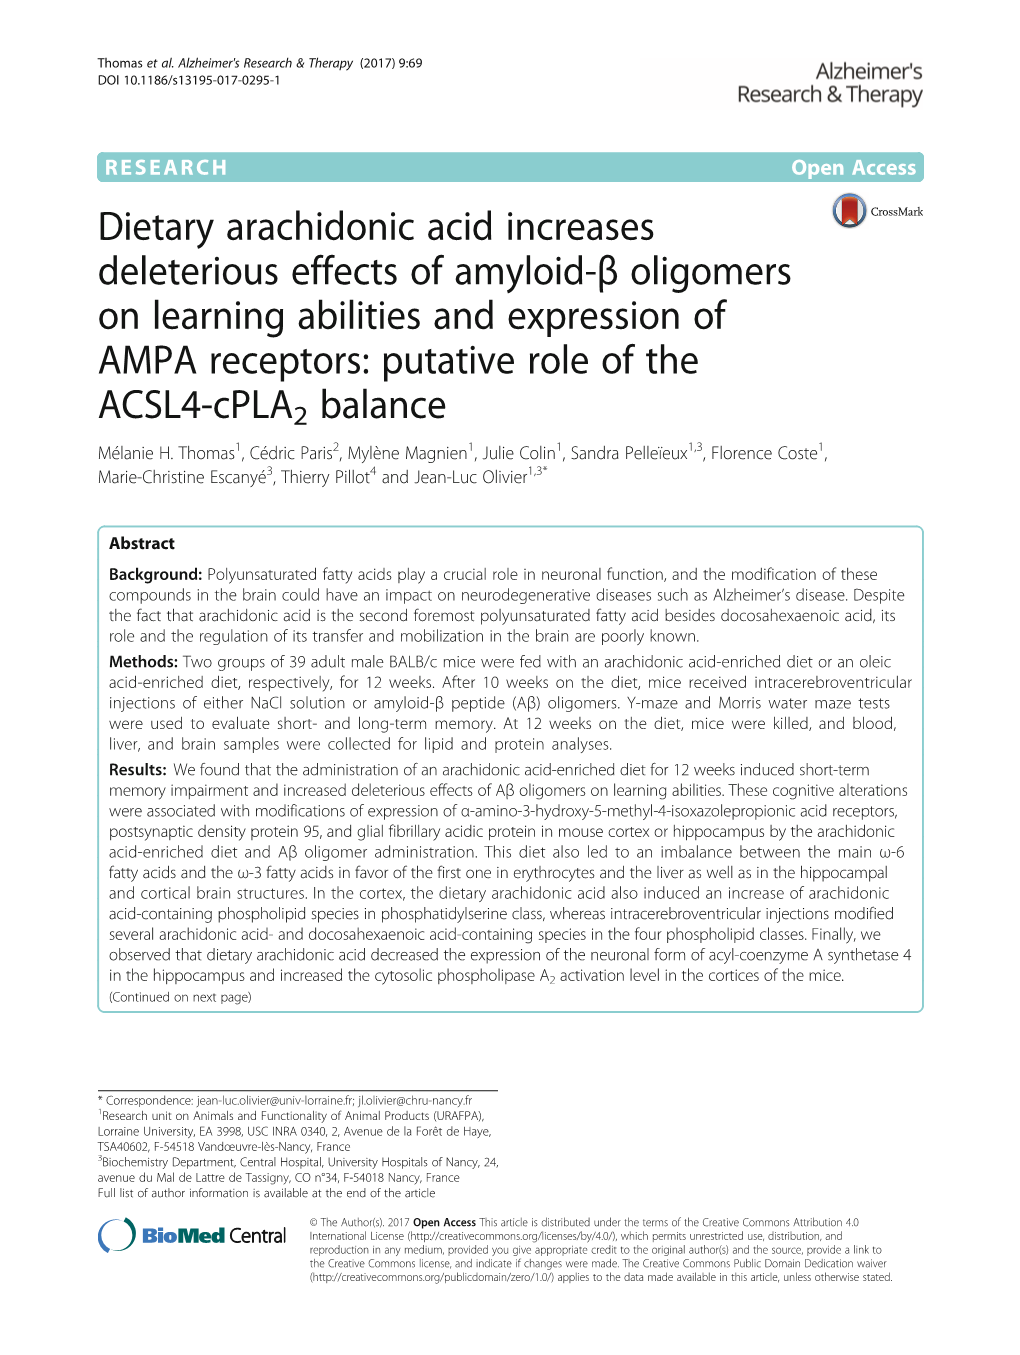 Dietary Arachidonic Acid Increases Deleterious Effects of Amyloid-Β Oligomers on Learning Abilities and Expression of AMPA Rece